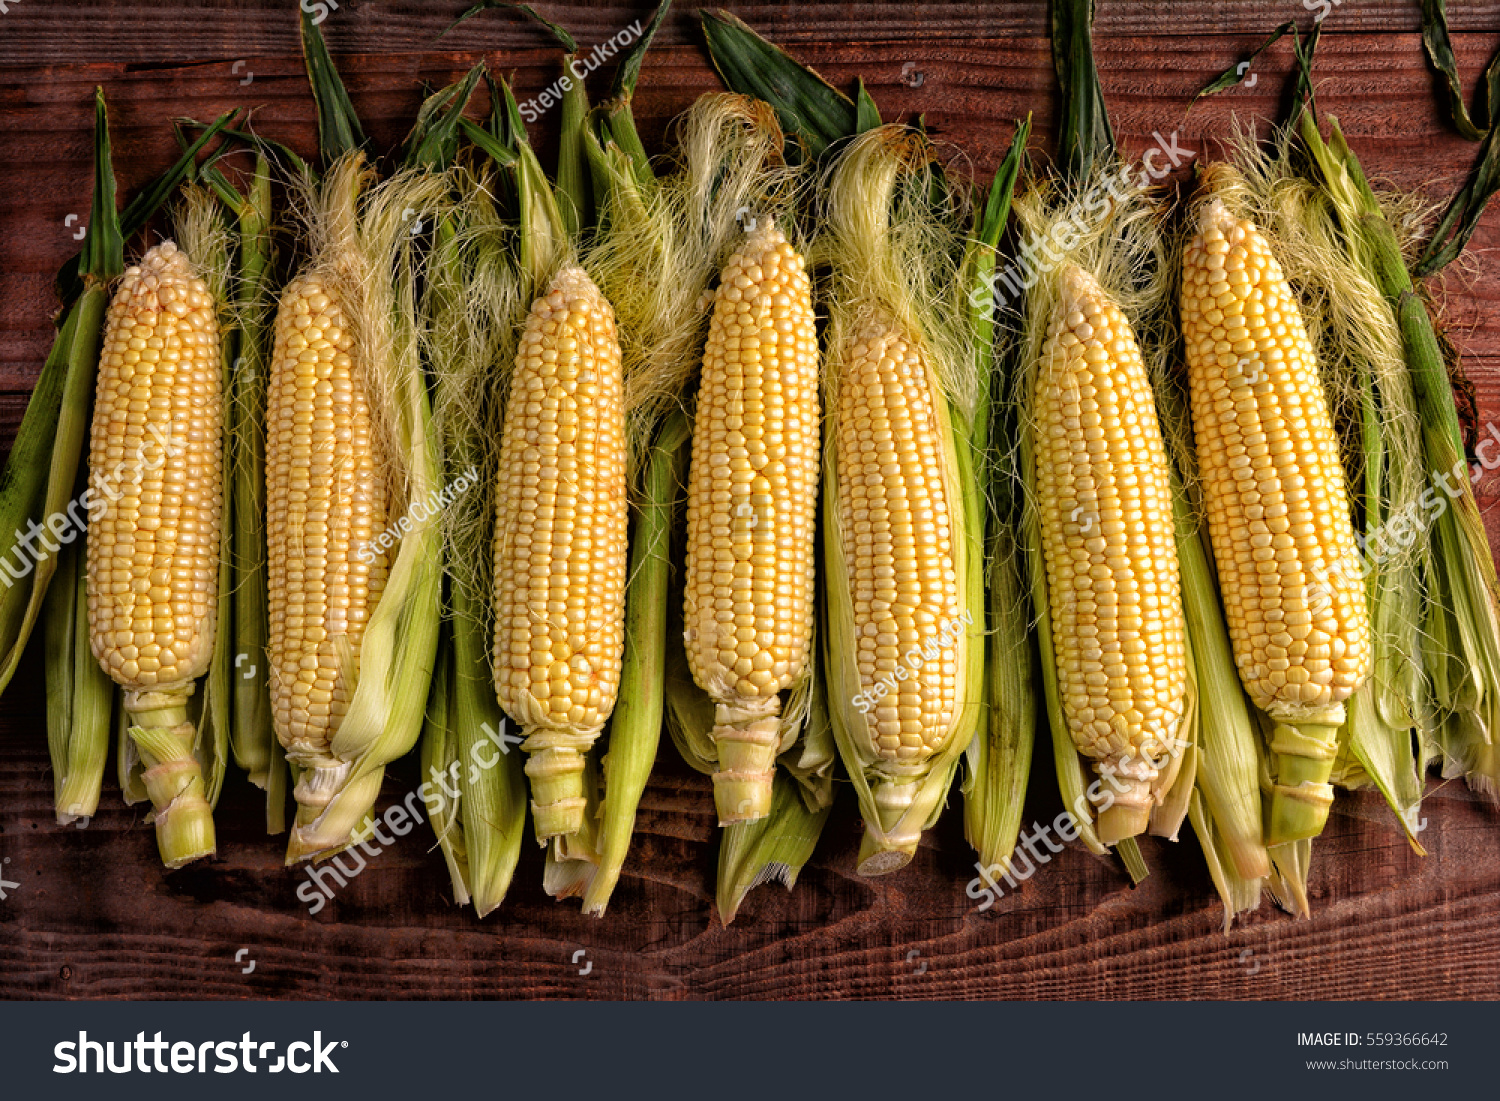 Several fresh picked and shucked corn on the cob ears on a rustic wood table. The sweet corn is shot from a high angle in horizontal format. #559366642